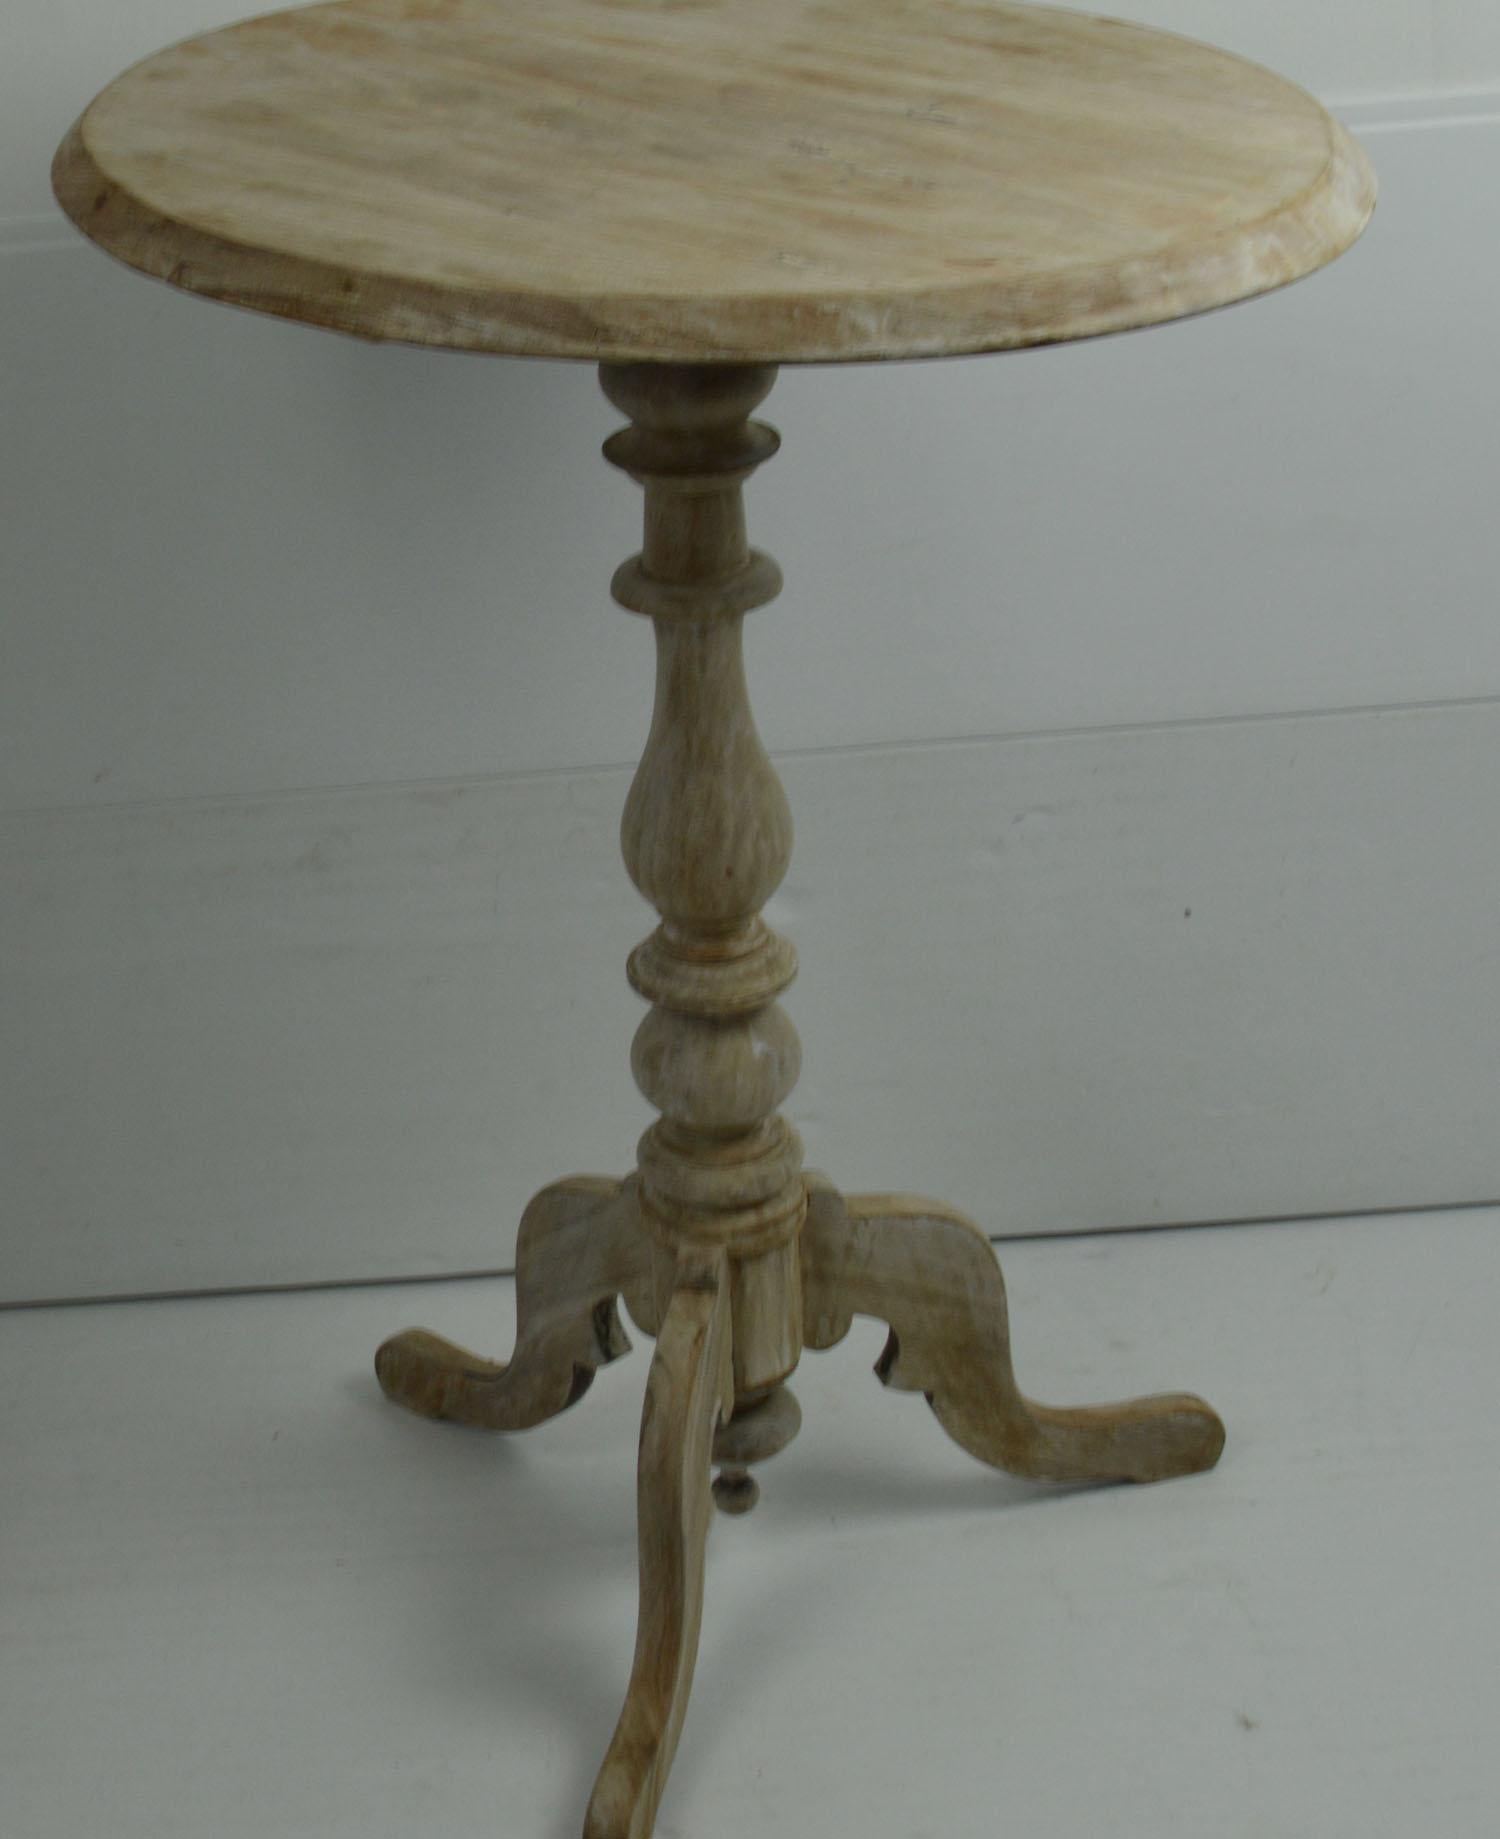 Georgian Small Antique Oval Bleached Mahogany Side Table, English, 19th Century